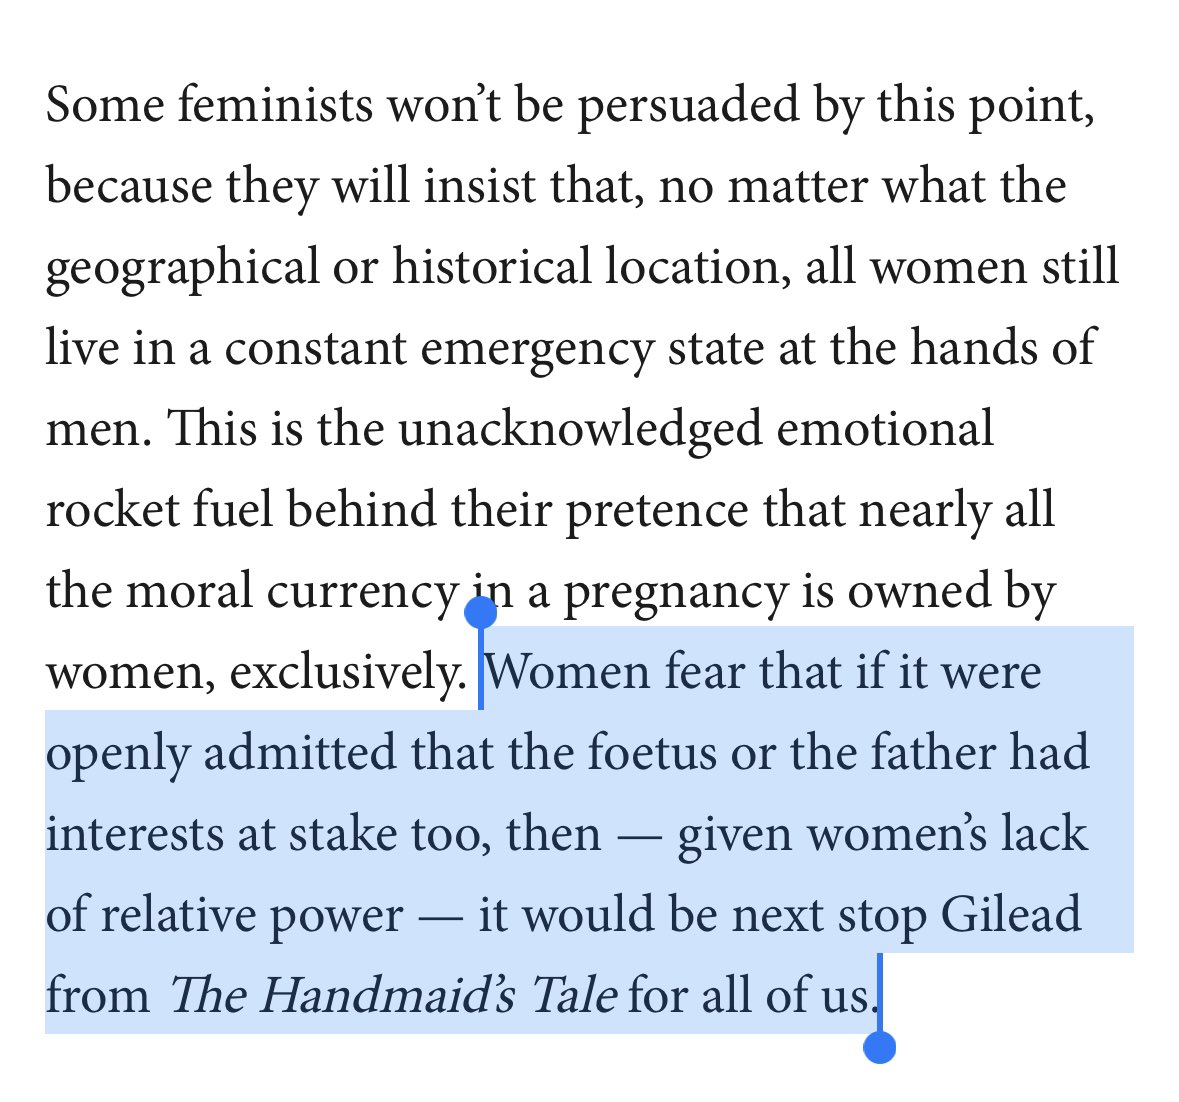 it’s not a handmaid’s tale metaphor kathleen it is very literally being forced to carry a pregnancy for someone else